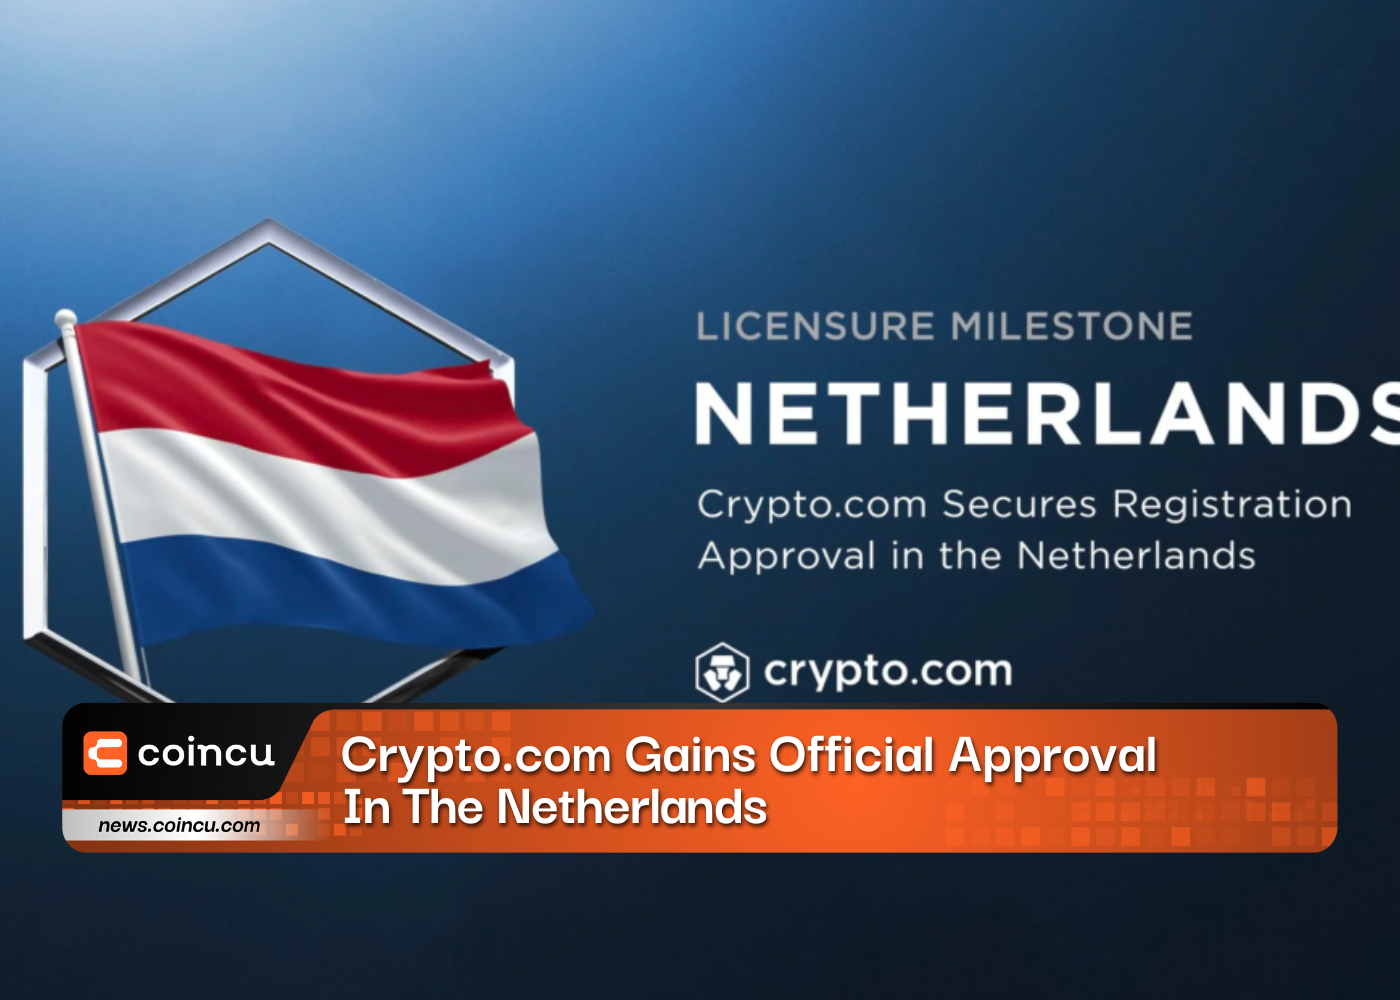 Crypto.com Gains Official Approval